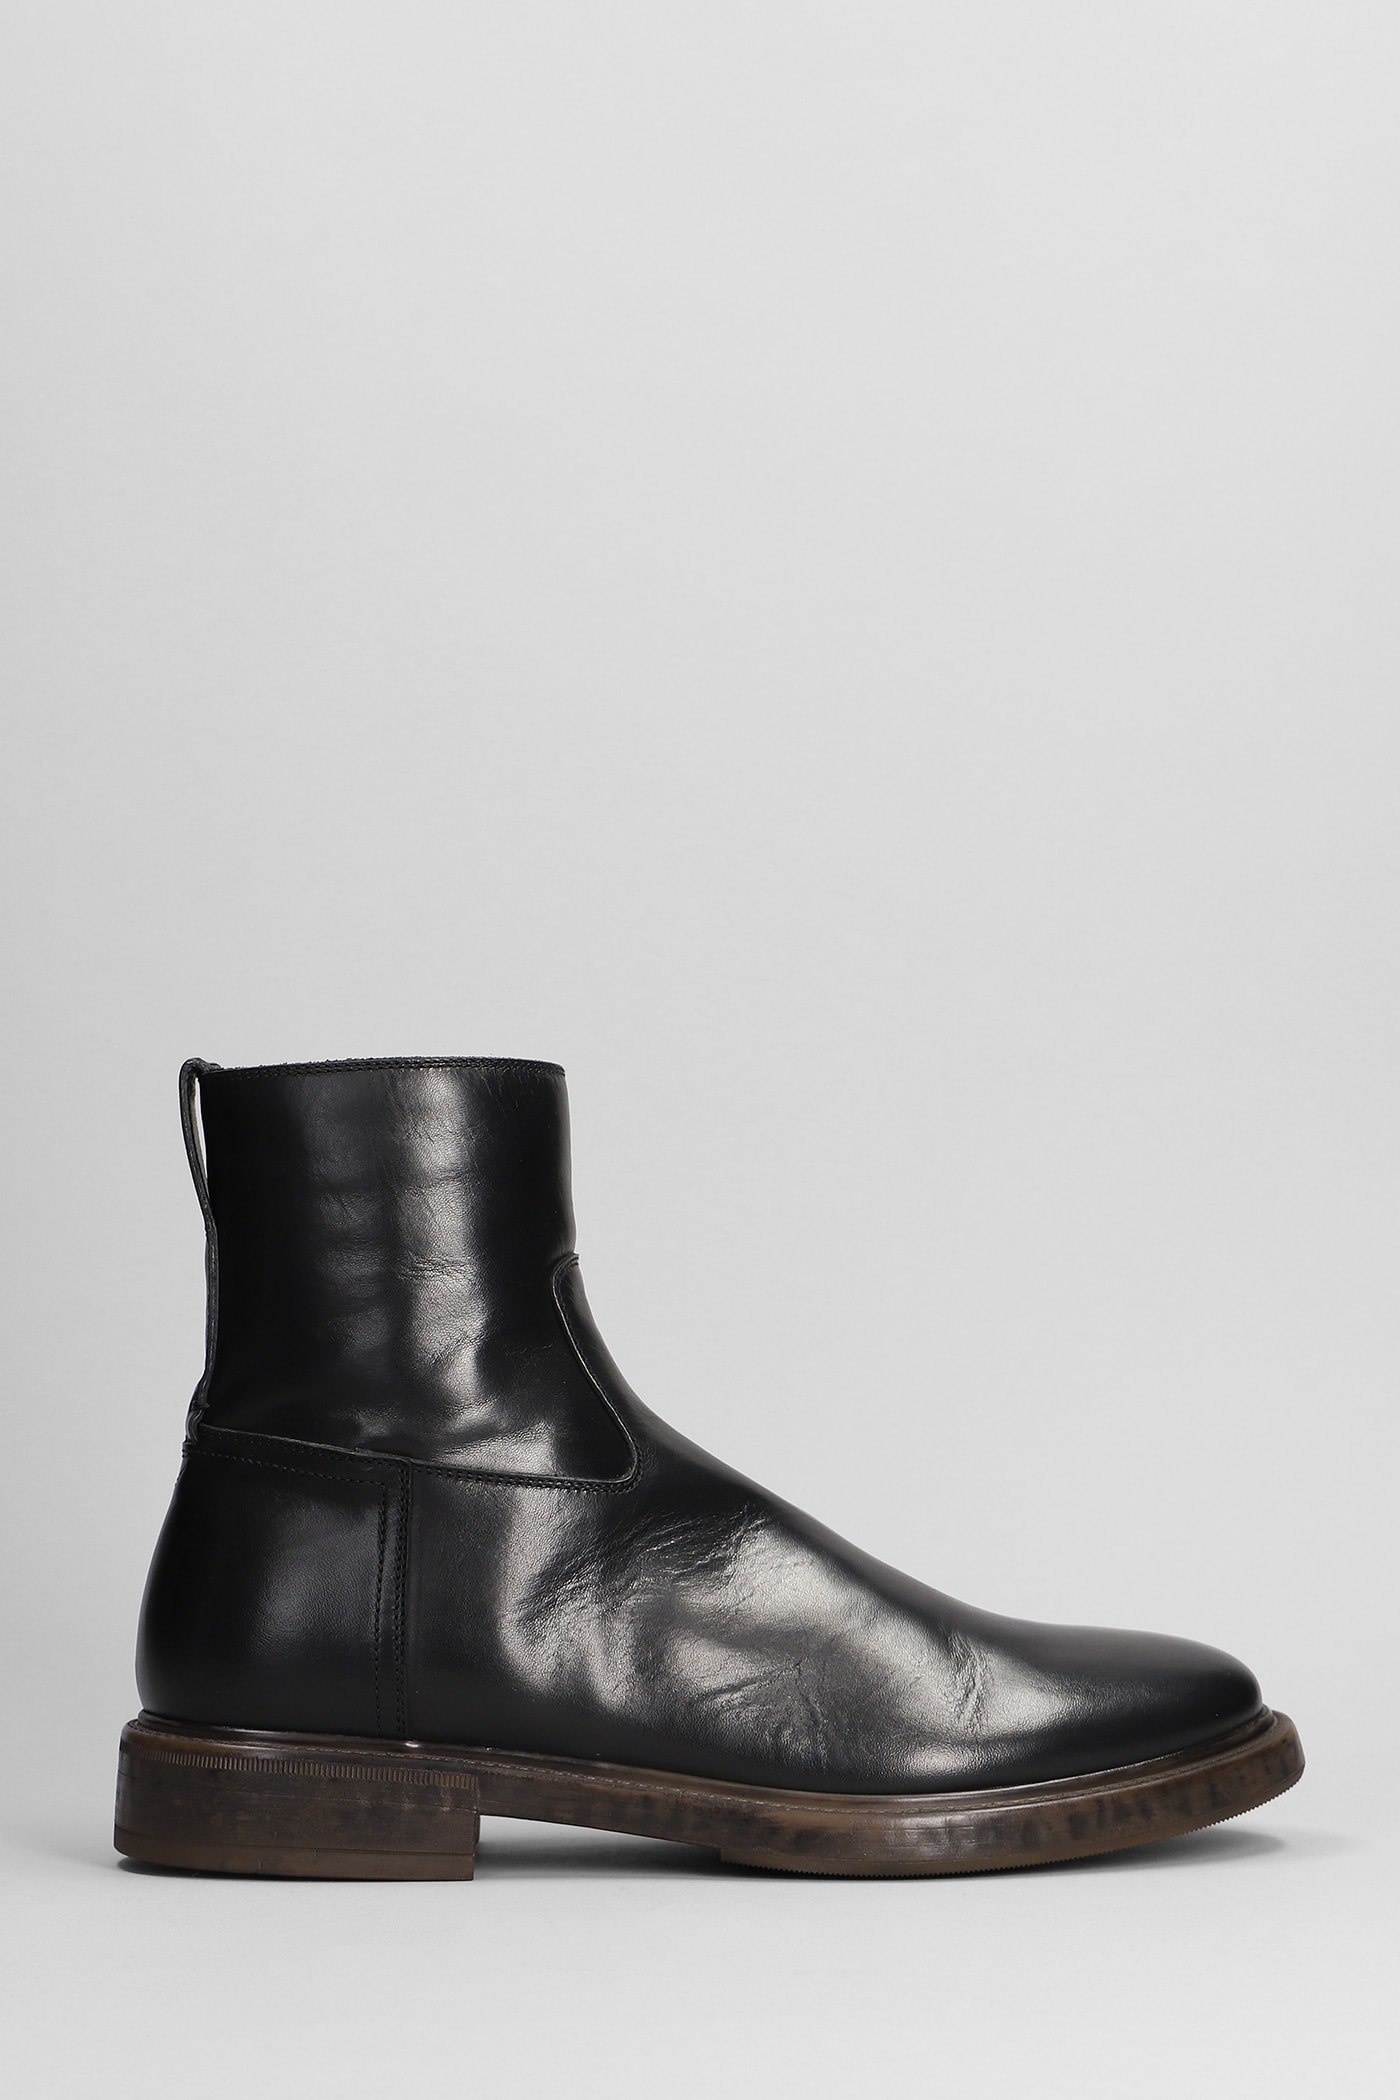 Silvano Sassetti Low Heels Ankle Boots In Black Leather